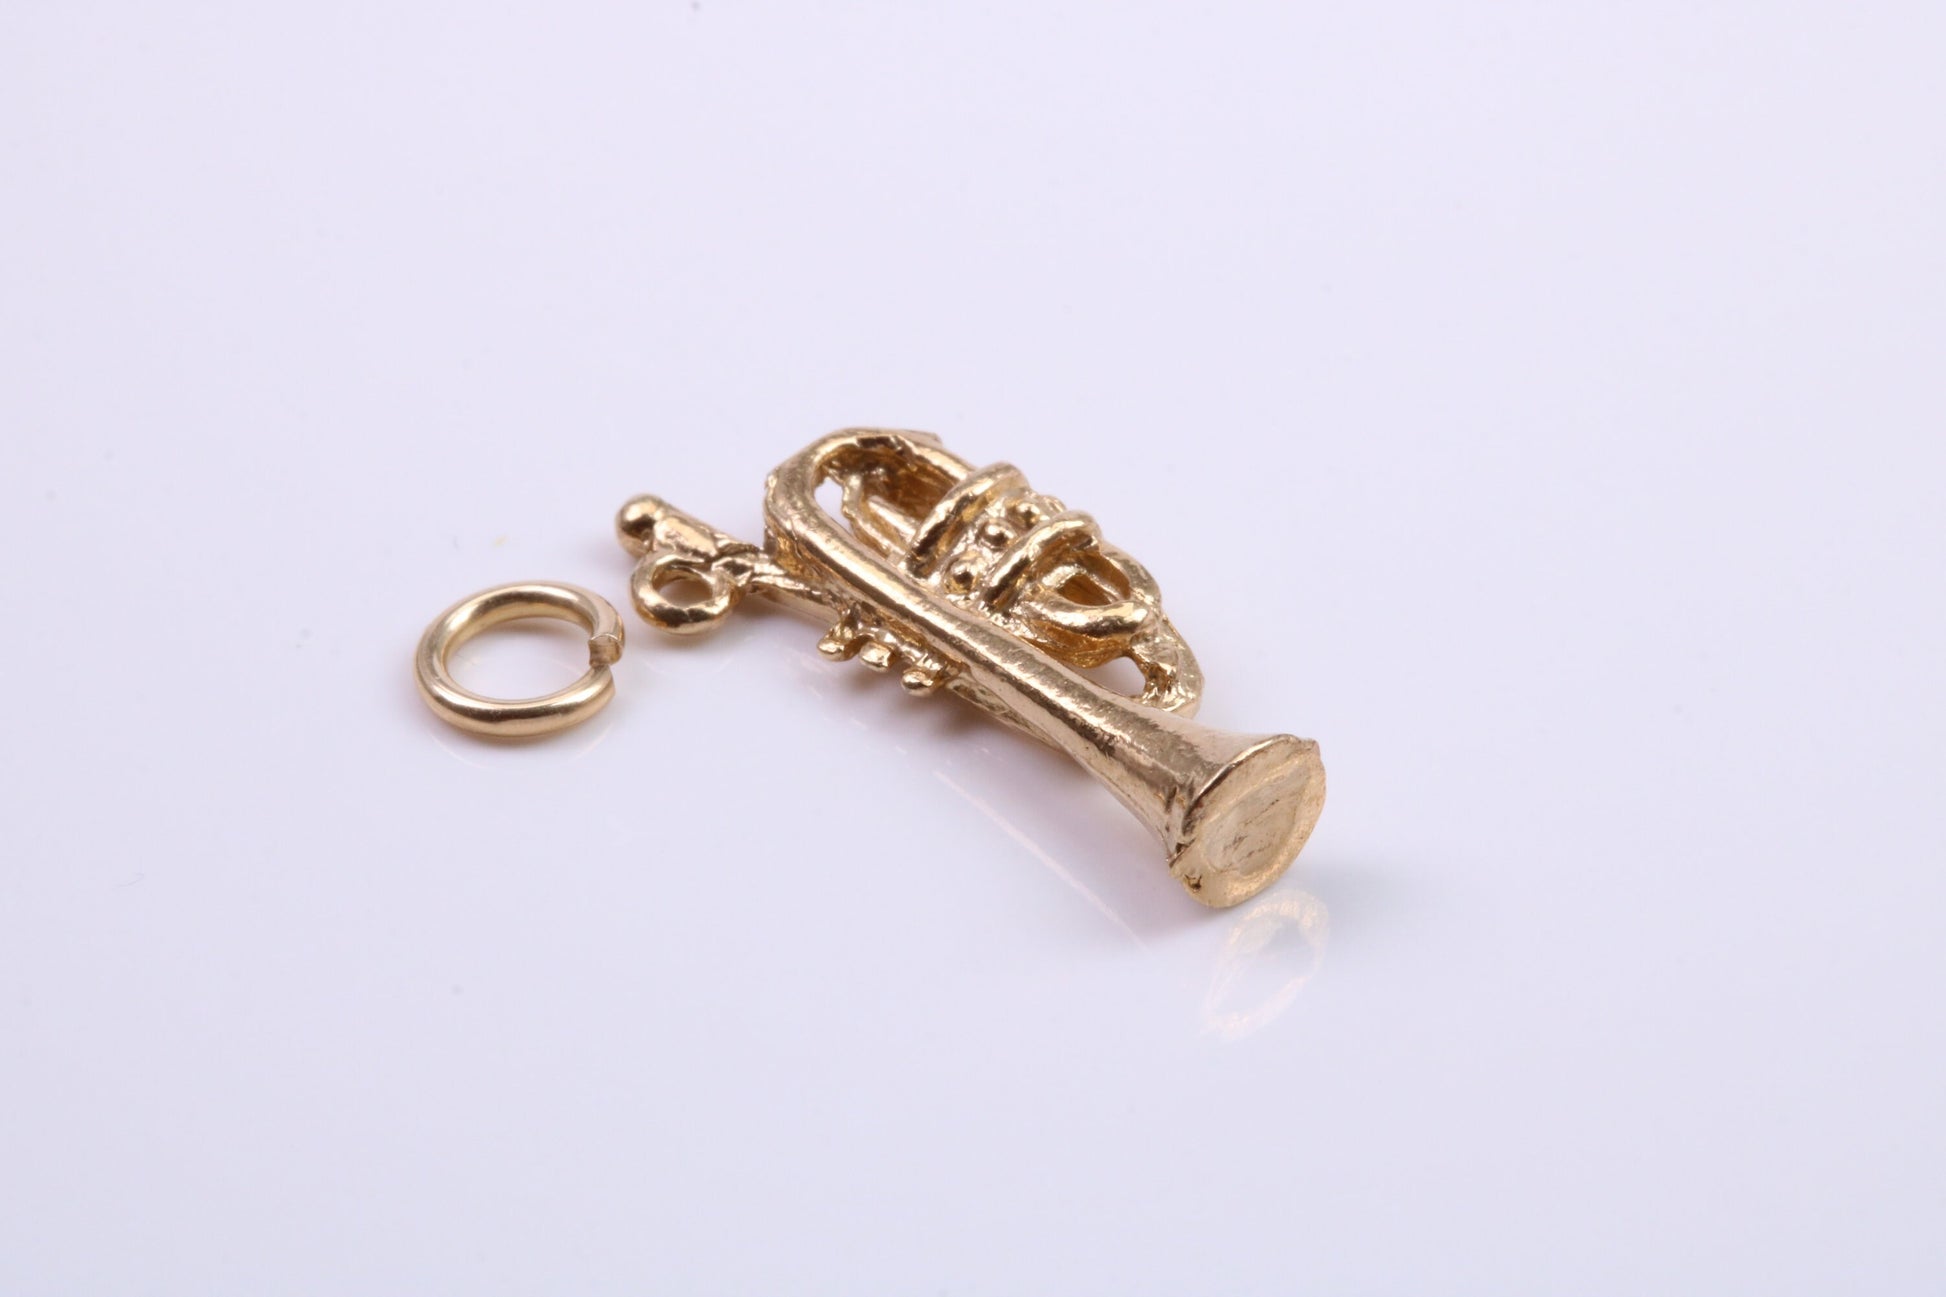 Tuba Charm, Traditional Charm, Made from Solid 9ct Yellow Gold, British Hallmarked, Complete with Attachment Link